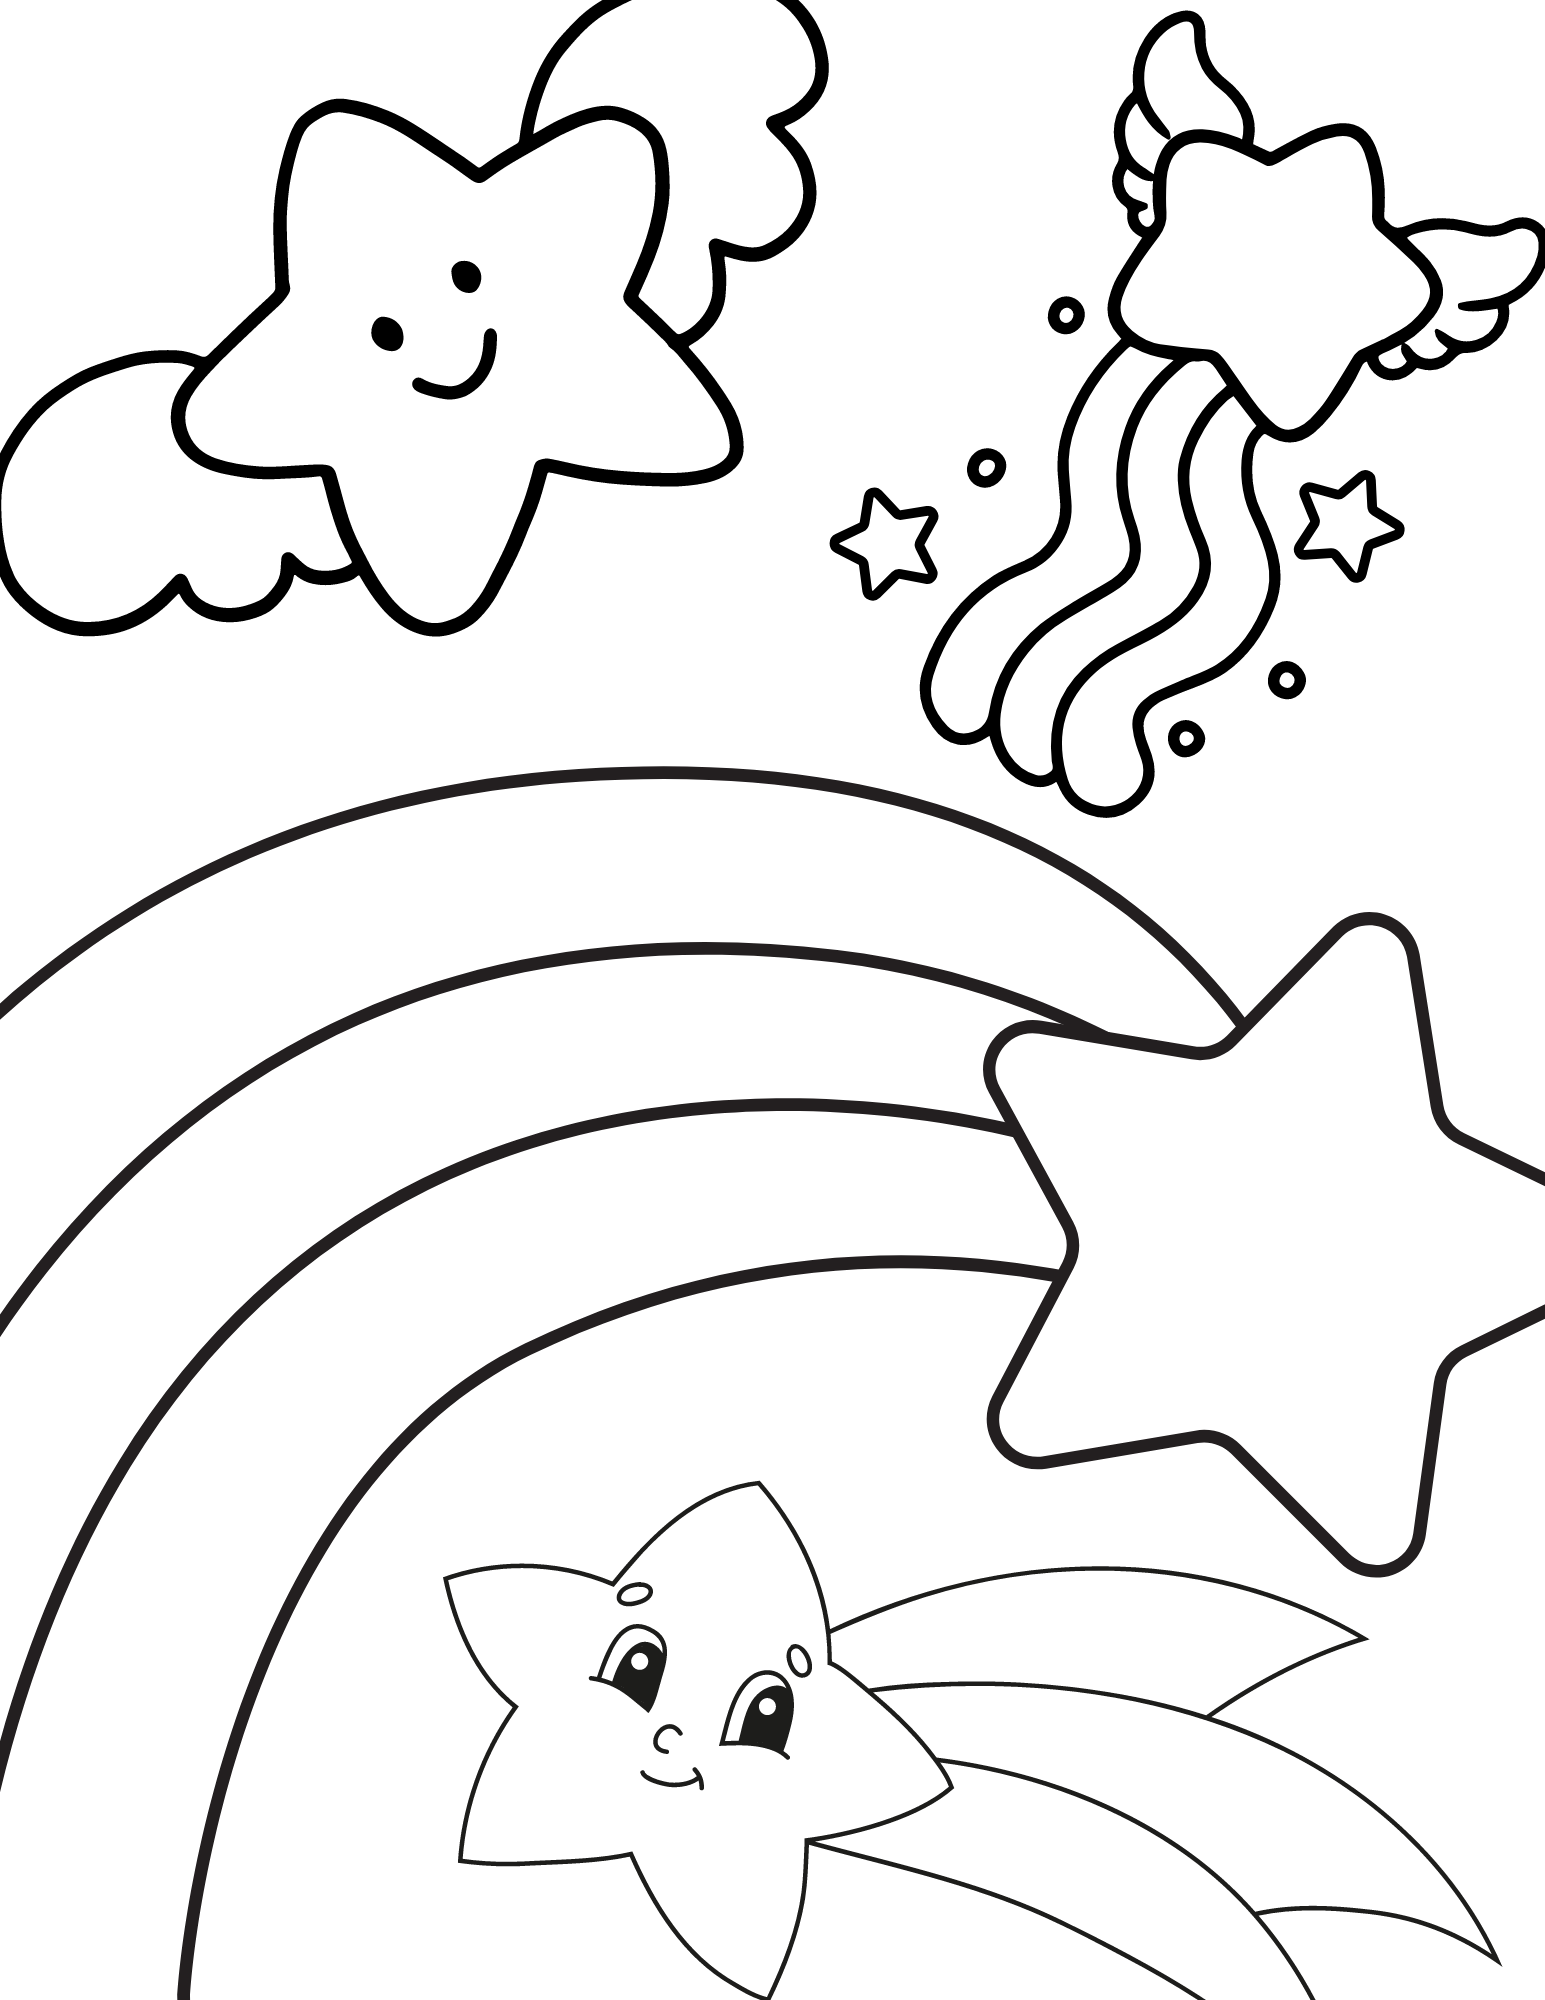 Wish upon a star with these free printable star coloring pages